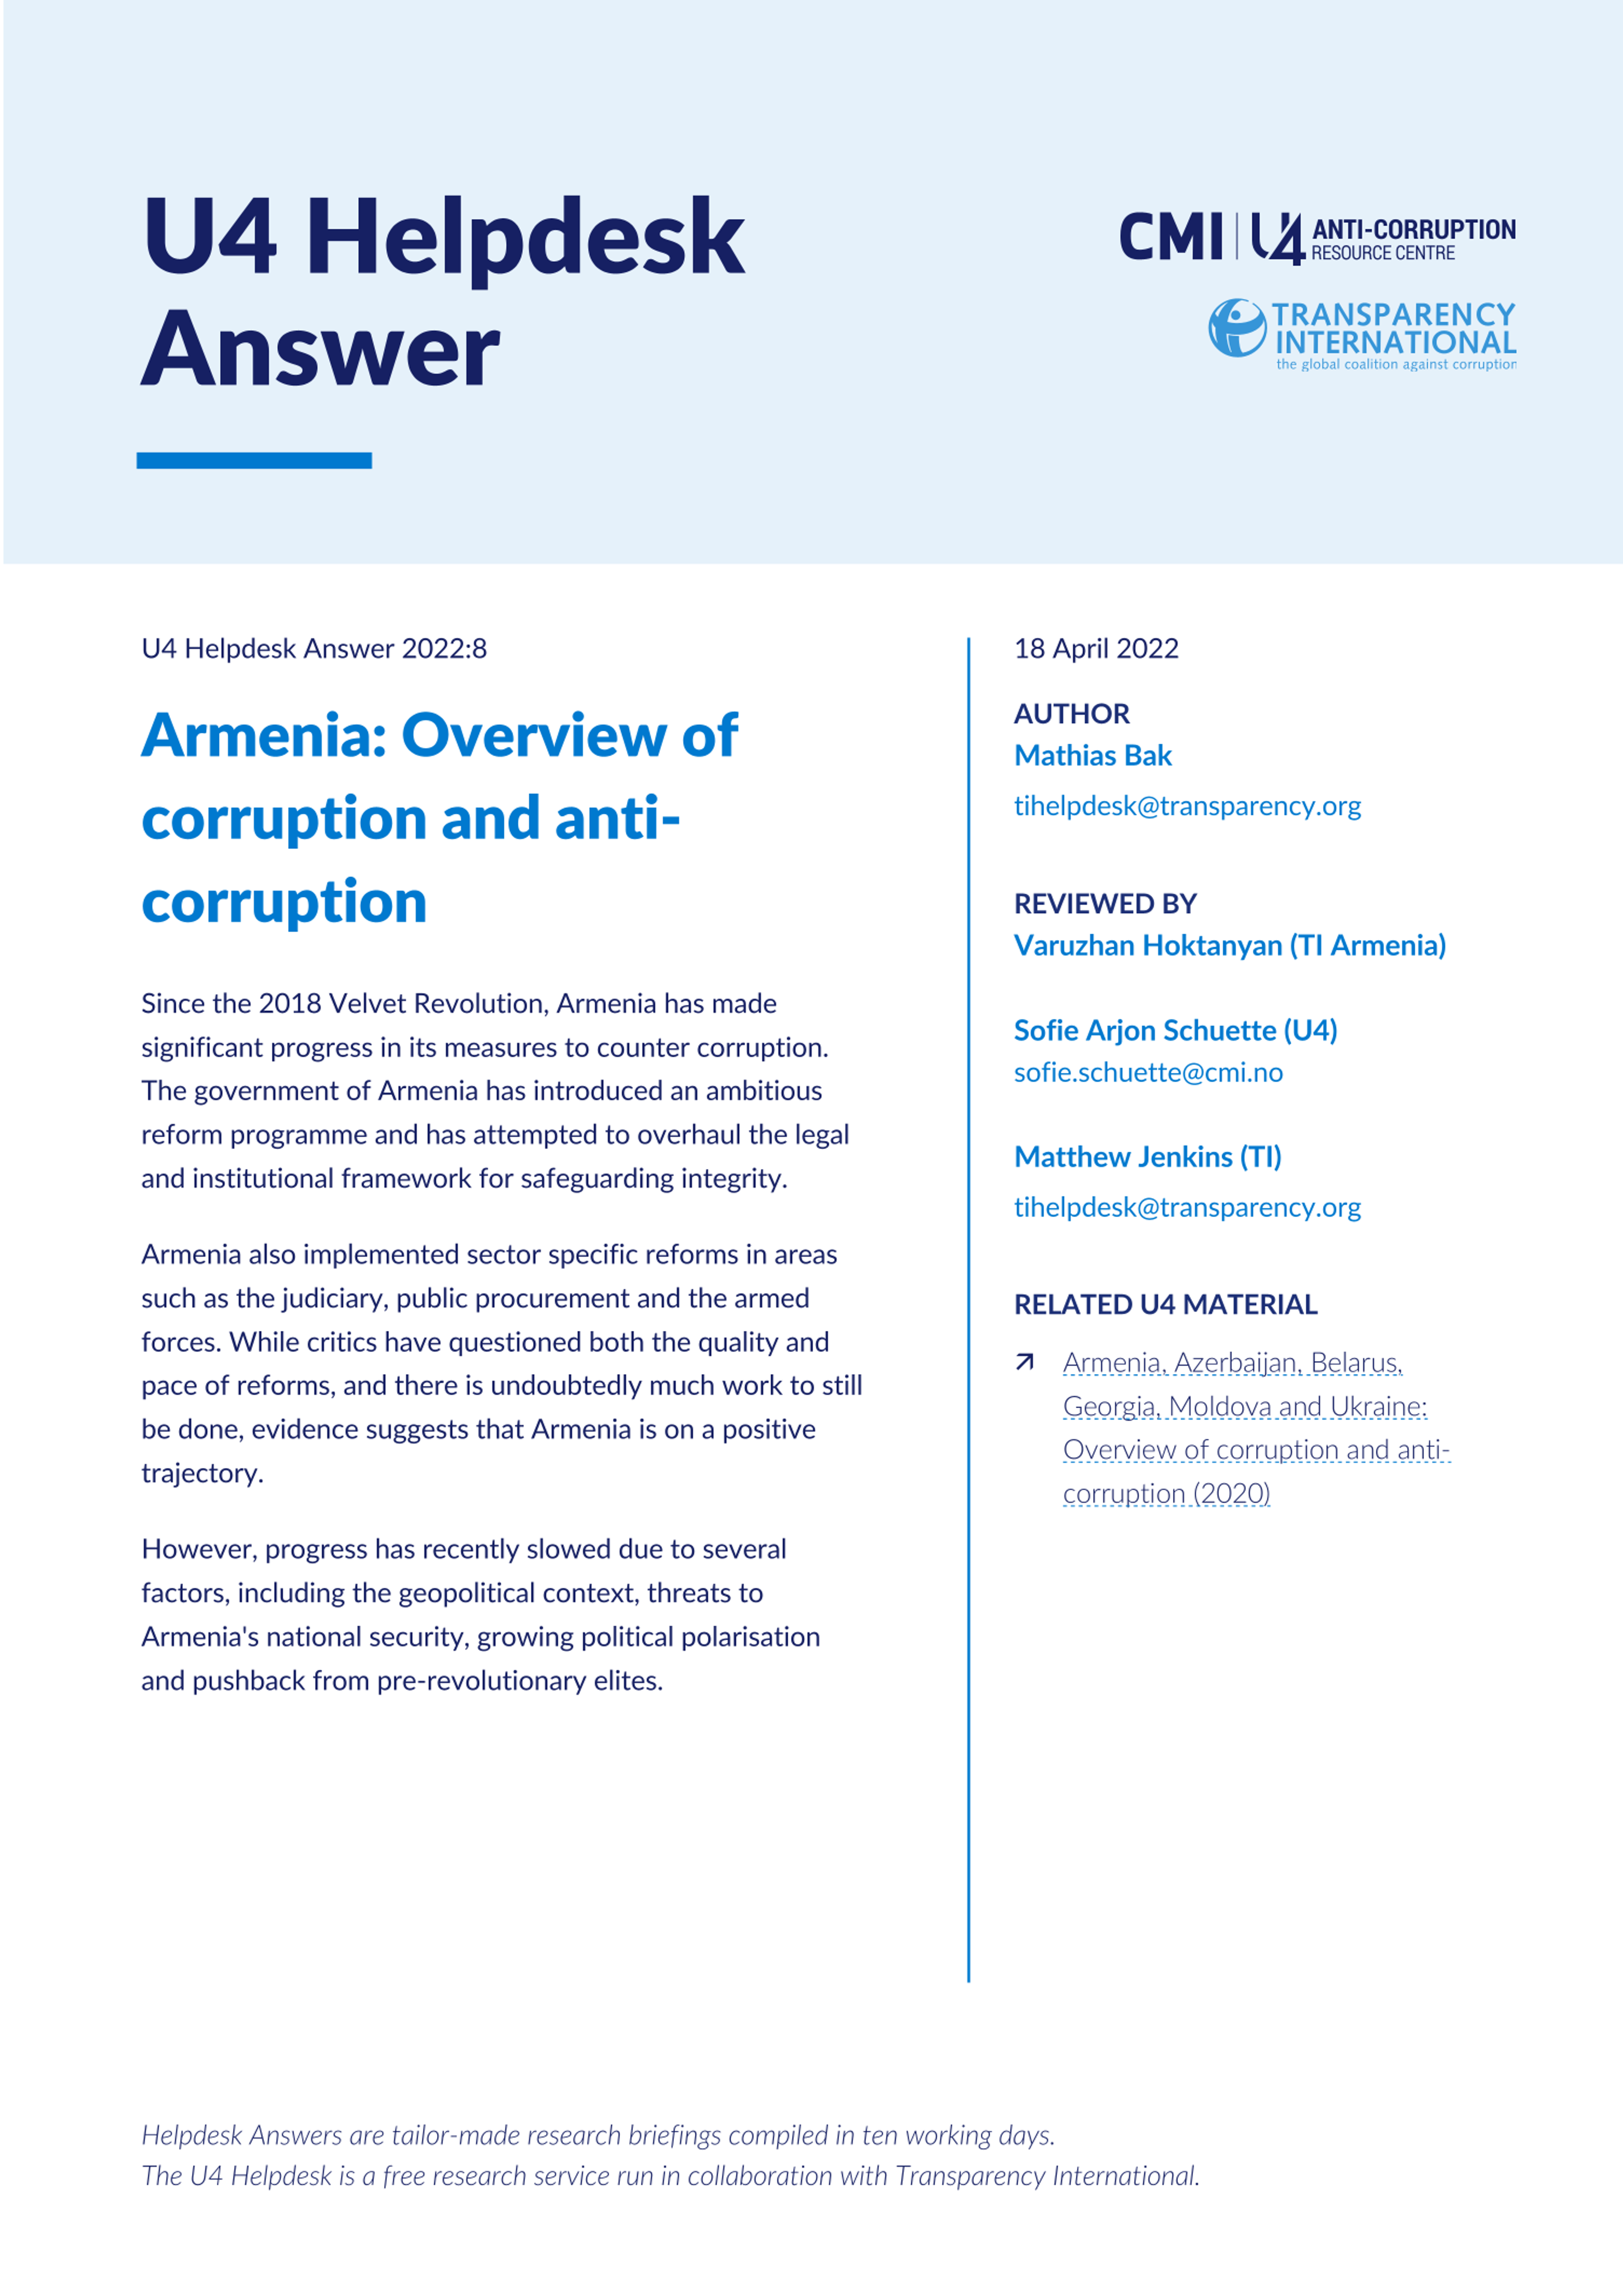 Armenia: Overview of corruption and anti-corruption